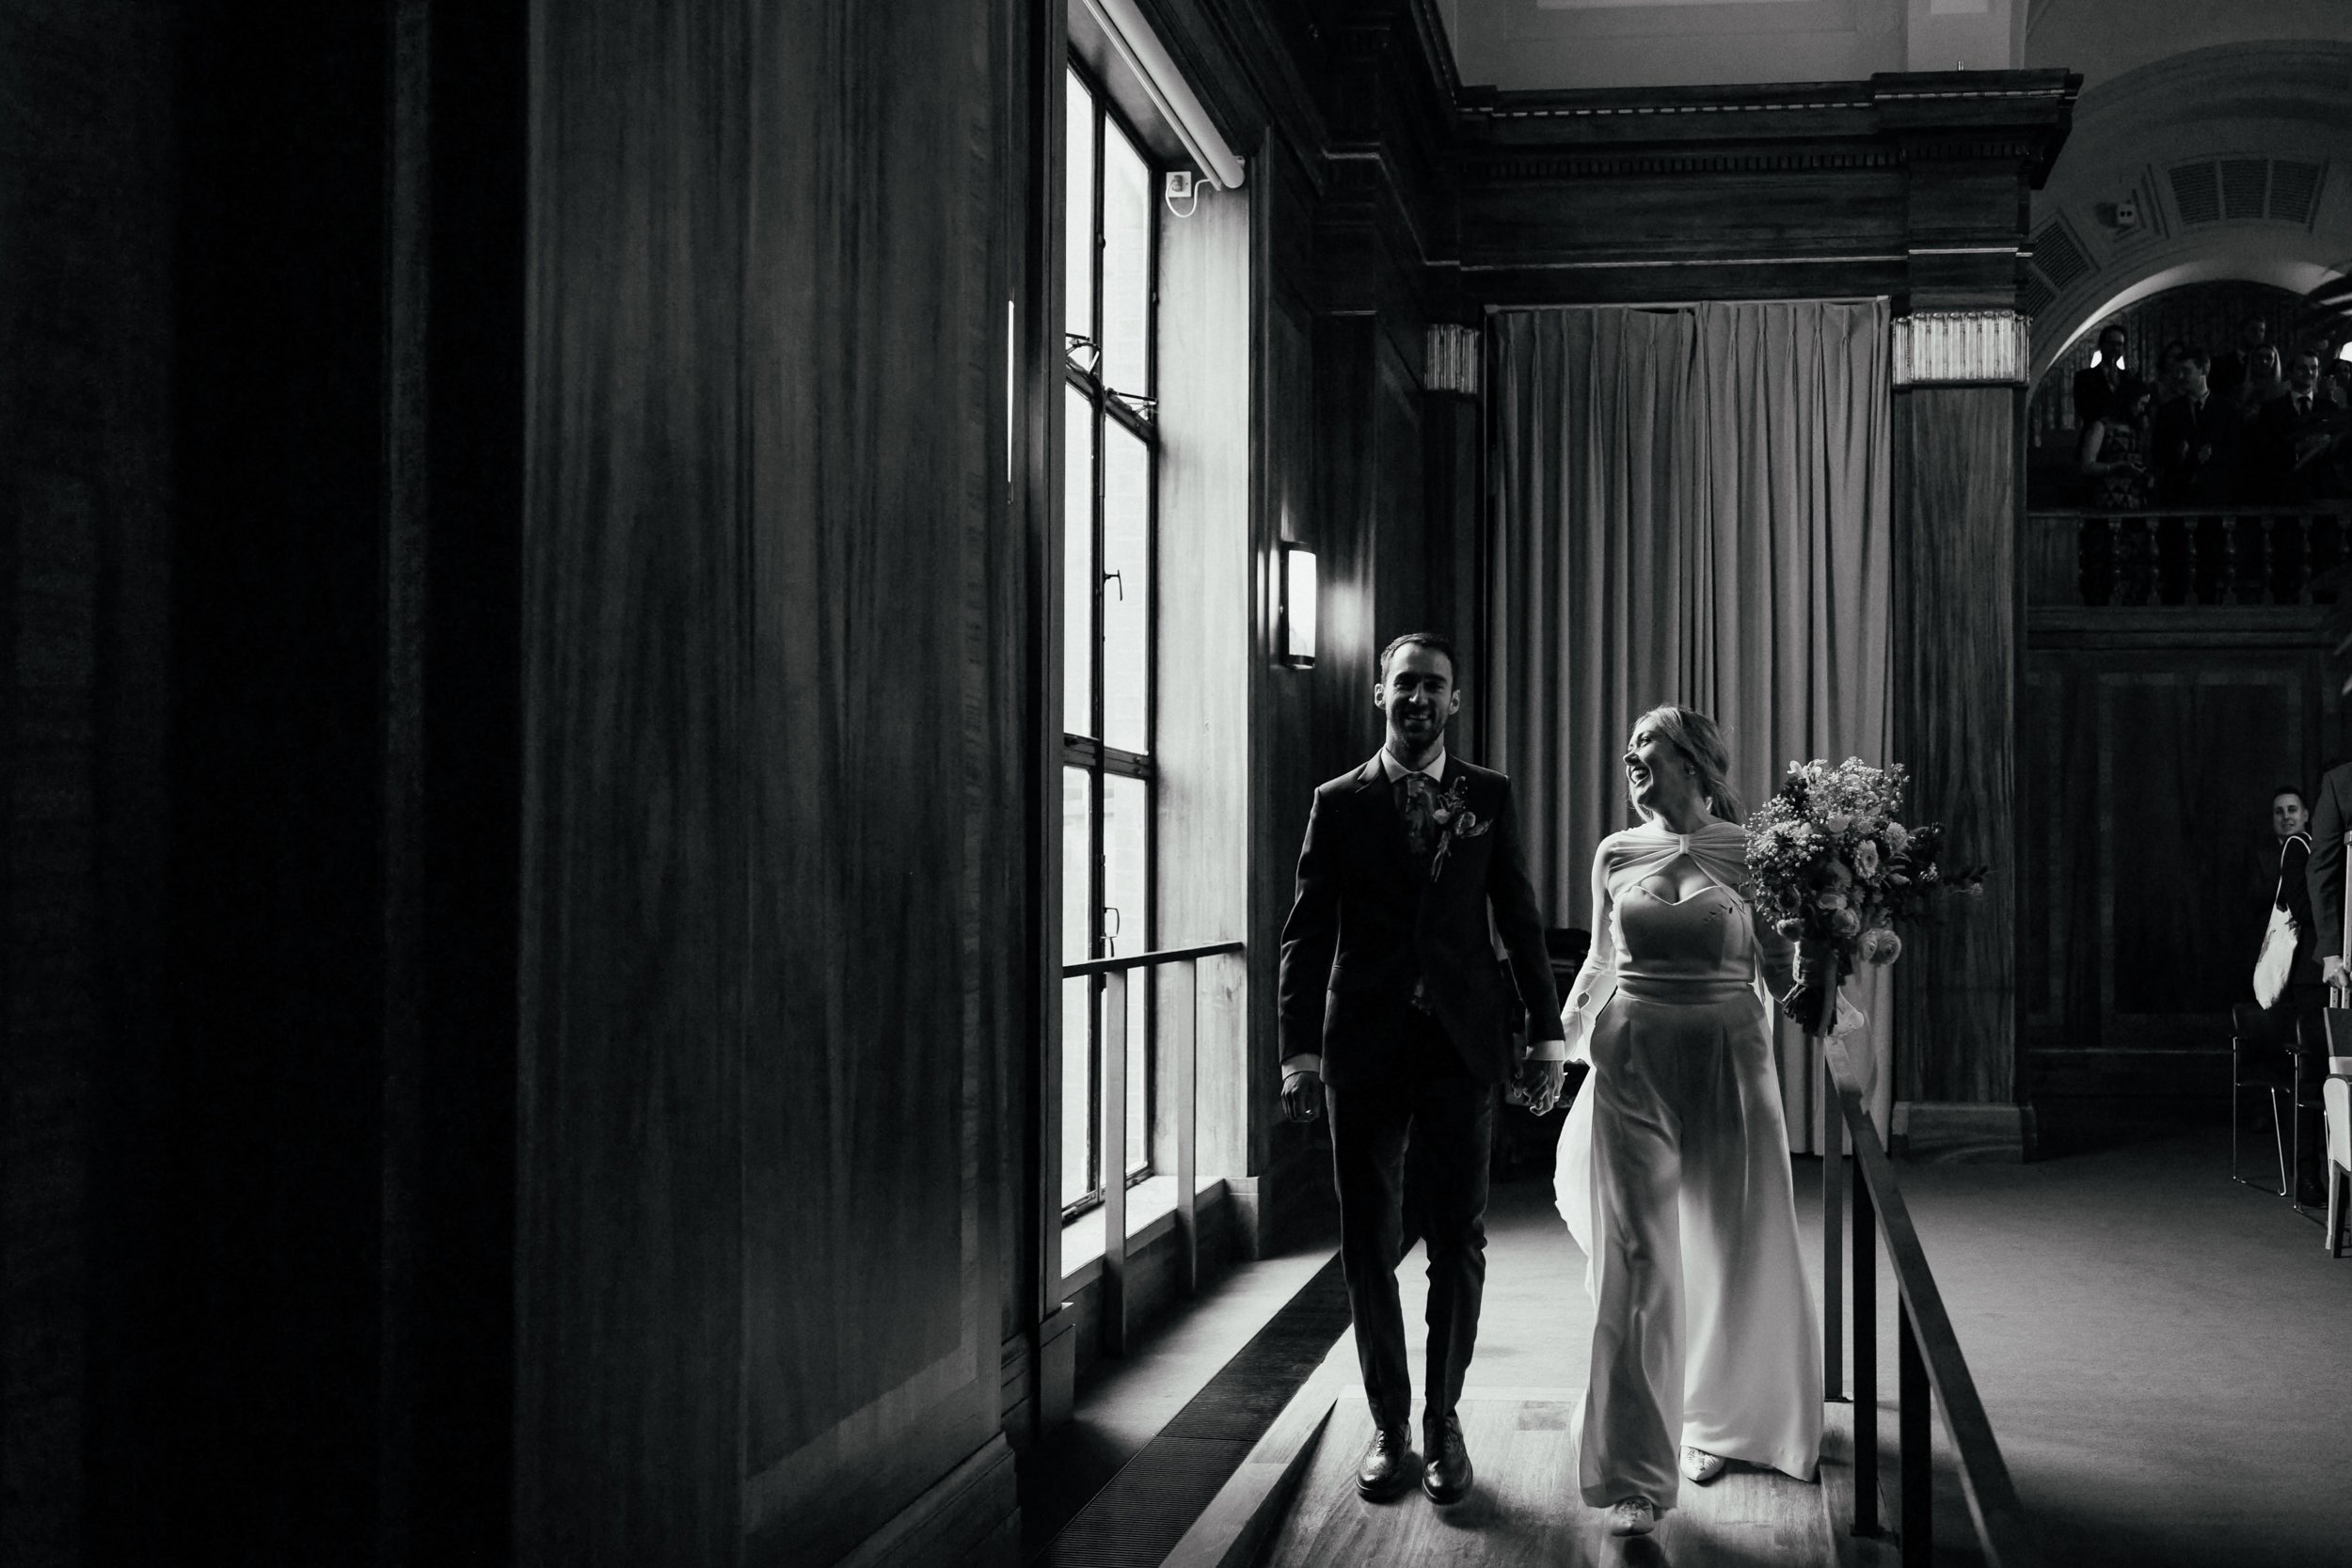  A black and white image of a just married couple joyfully walking out of their ceremony at Stoke Newton Town Hall, they are lit dramatically by window light from the left hand side. The bride is mid stride and we can see that she is wearing a wide l